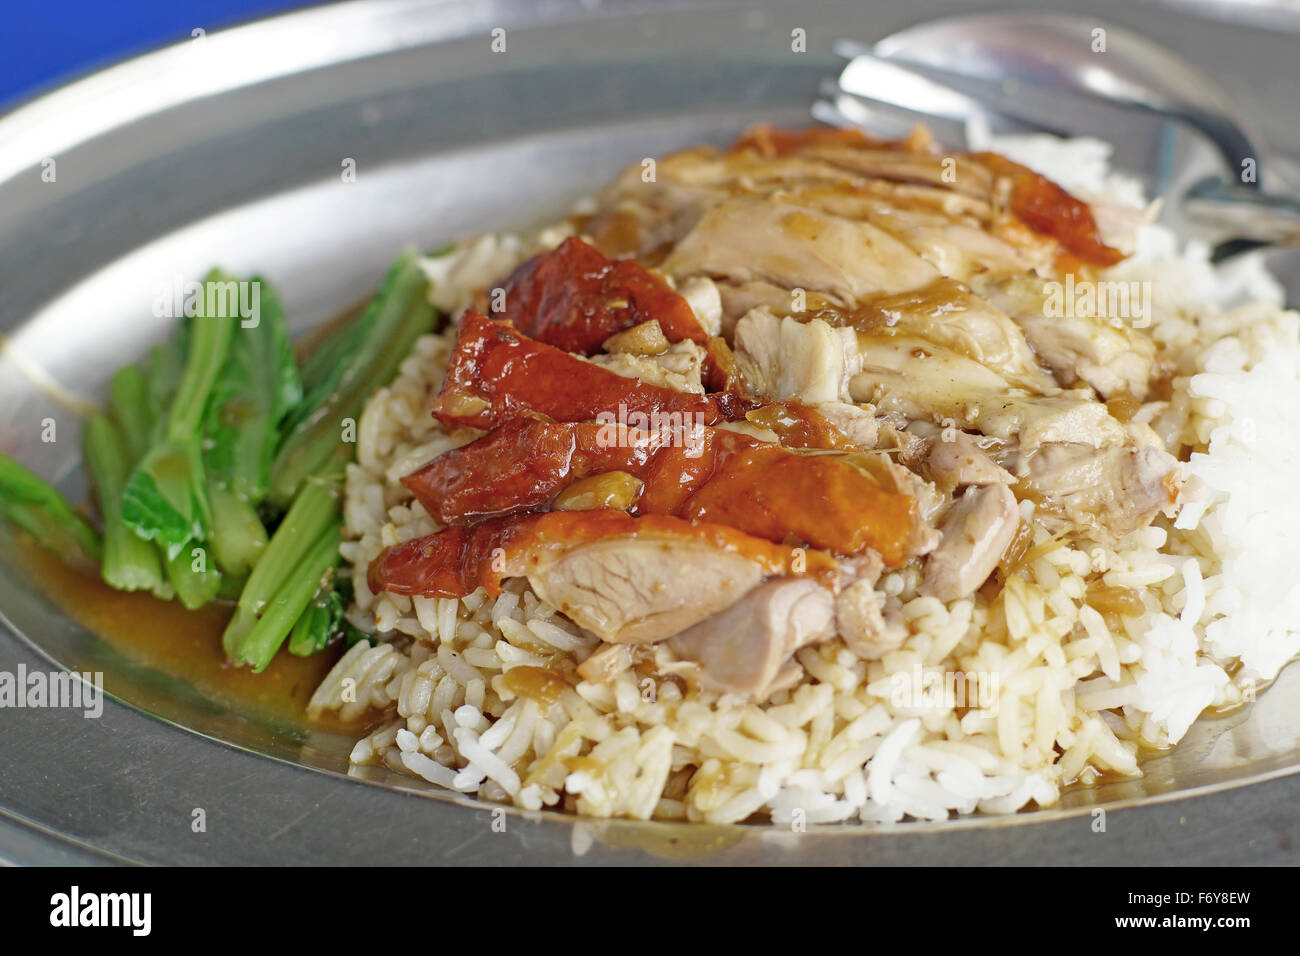 chinese food, roasted duck on steamed rice with sauce Stock Photo